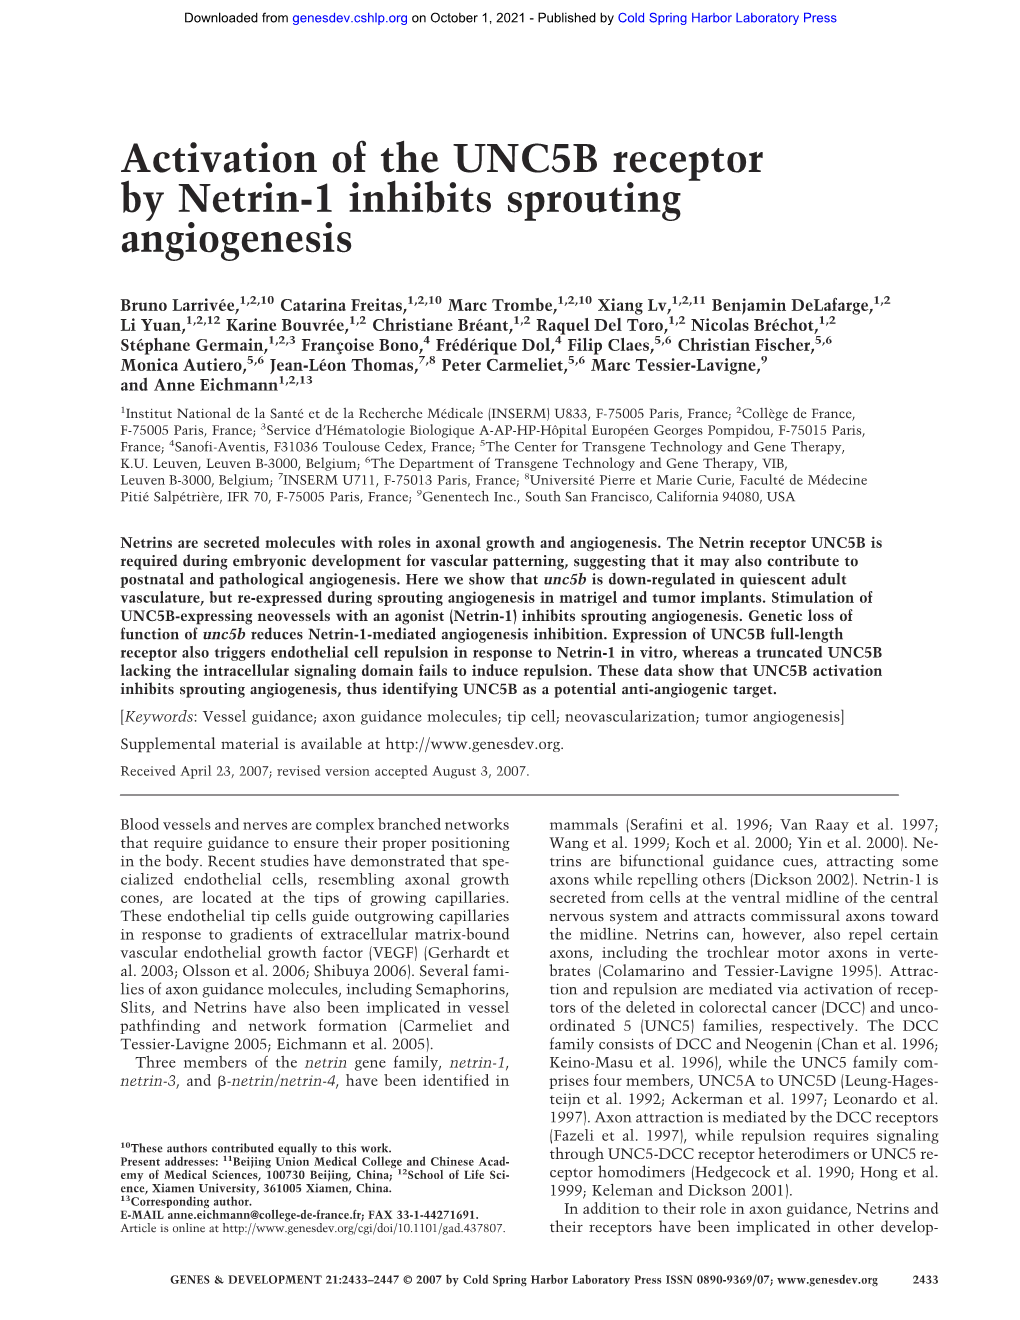 Activation of the UNC5B Receptor by Netrin-1 Inhibits Sprouting Angiogenesis